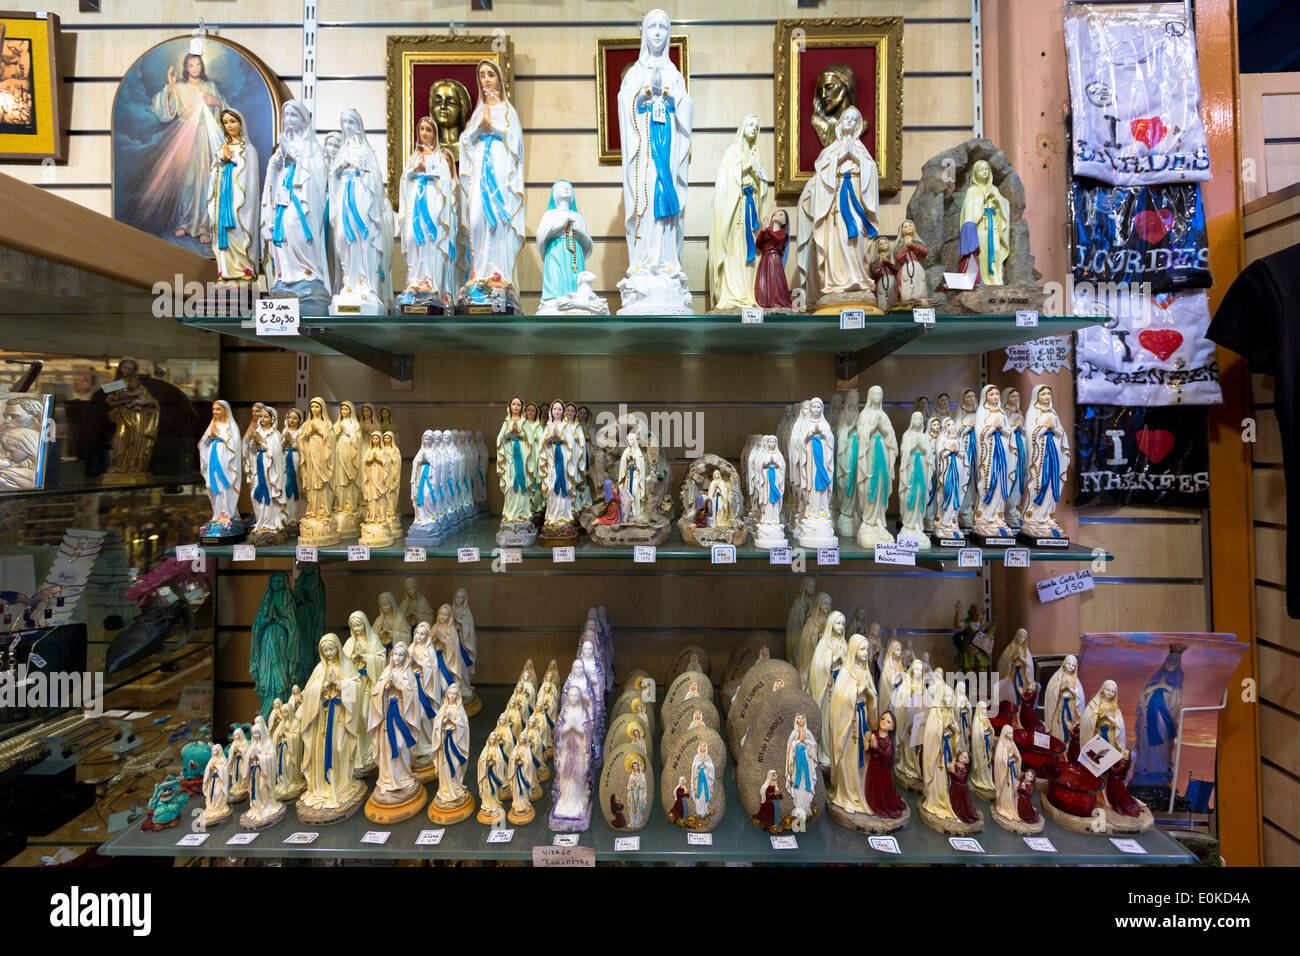 Religious icons and statues of Our Lady and Saint Bernadette at pilgrimage location of Lourdes in Southern France Stock Photo